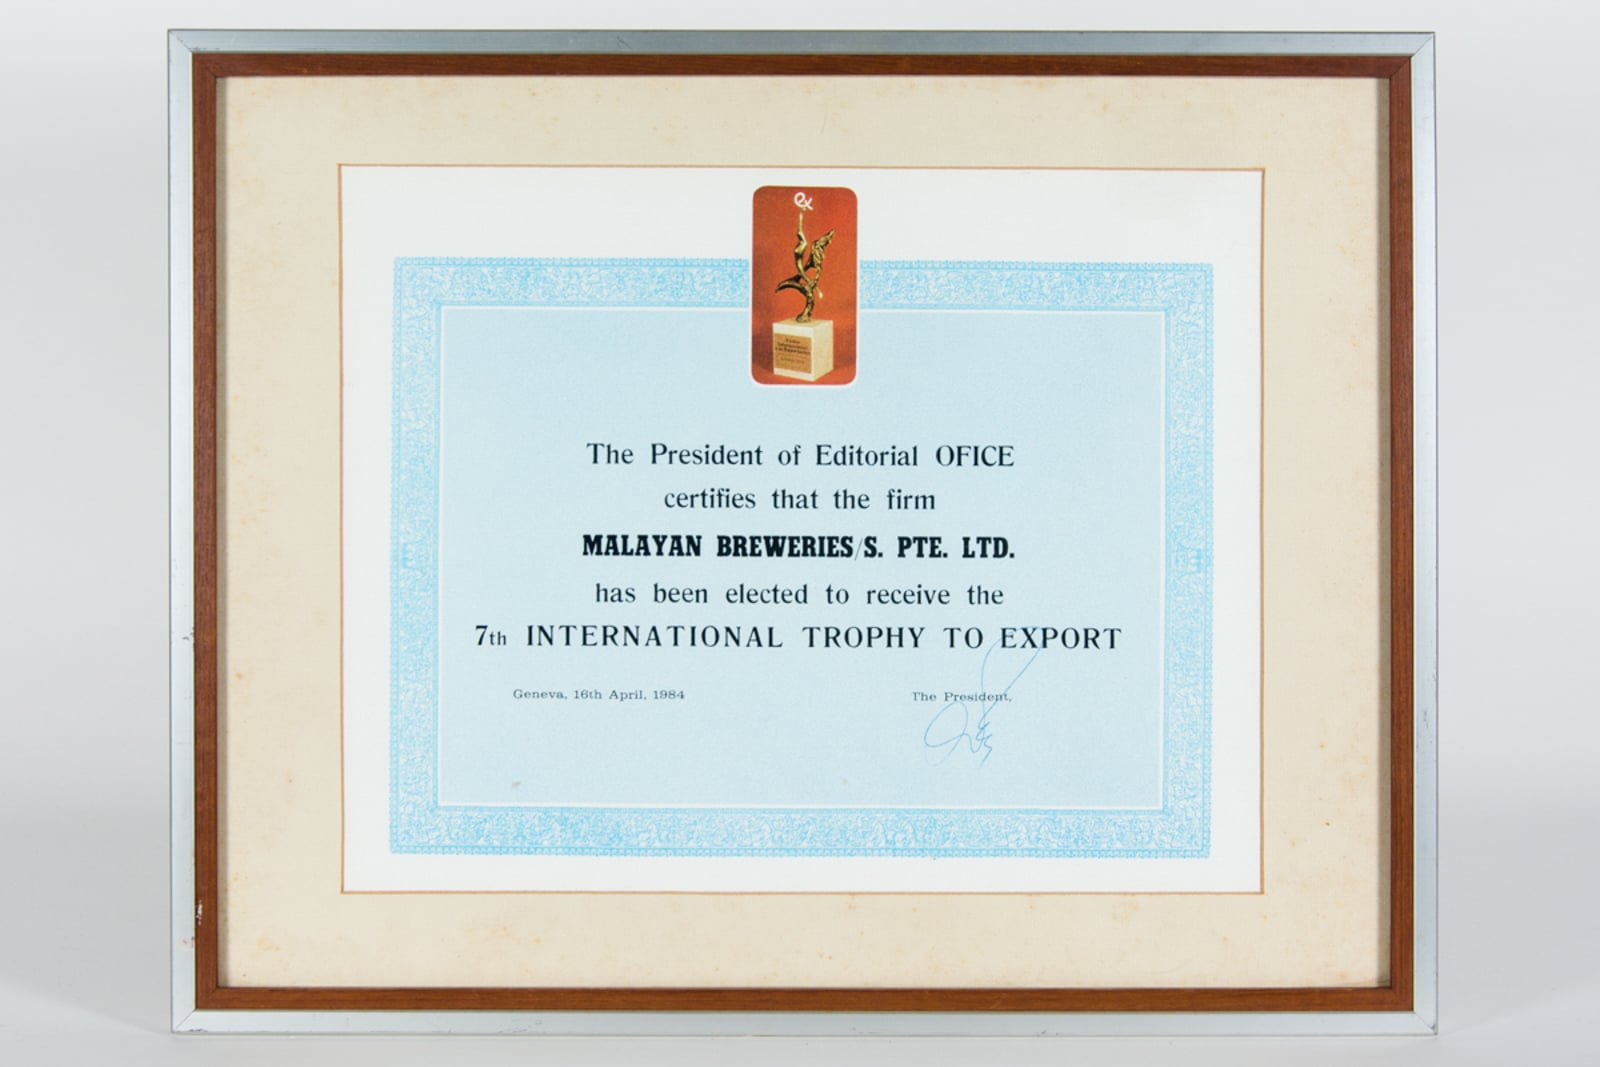 Malayan Breweries/S. Pte. Ltd., 7th International Trophy to Export, President of Editorial OFICE Certificate 1984